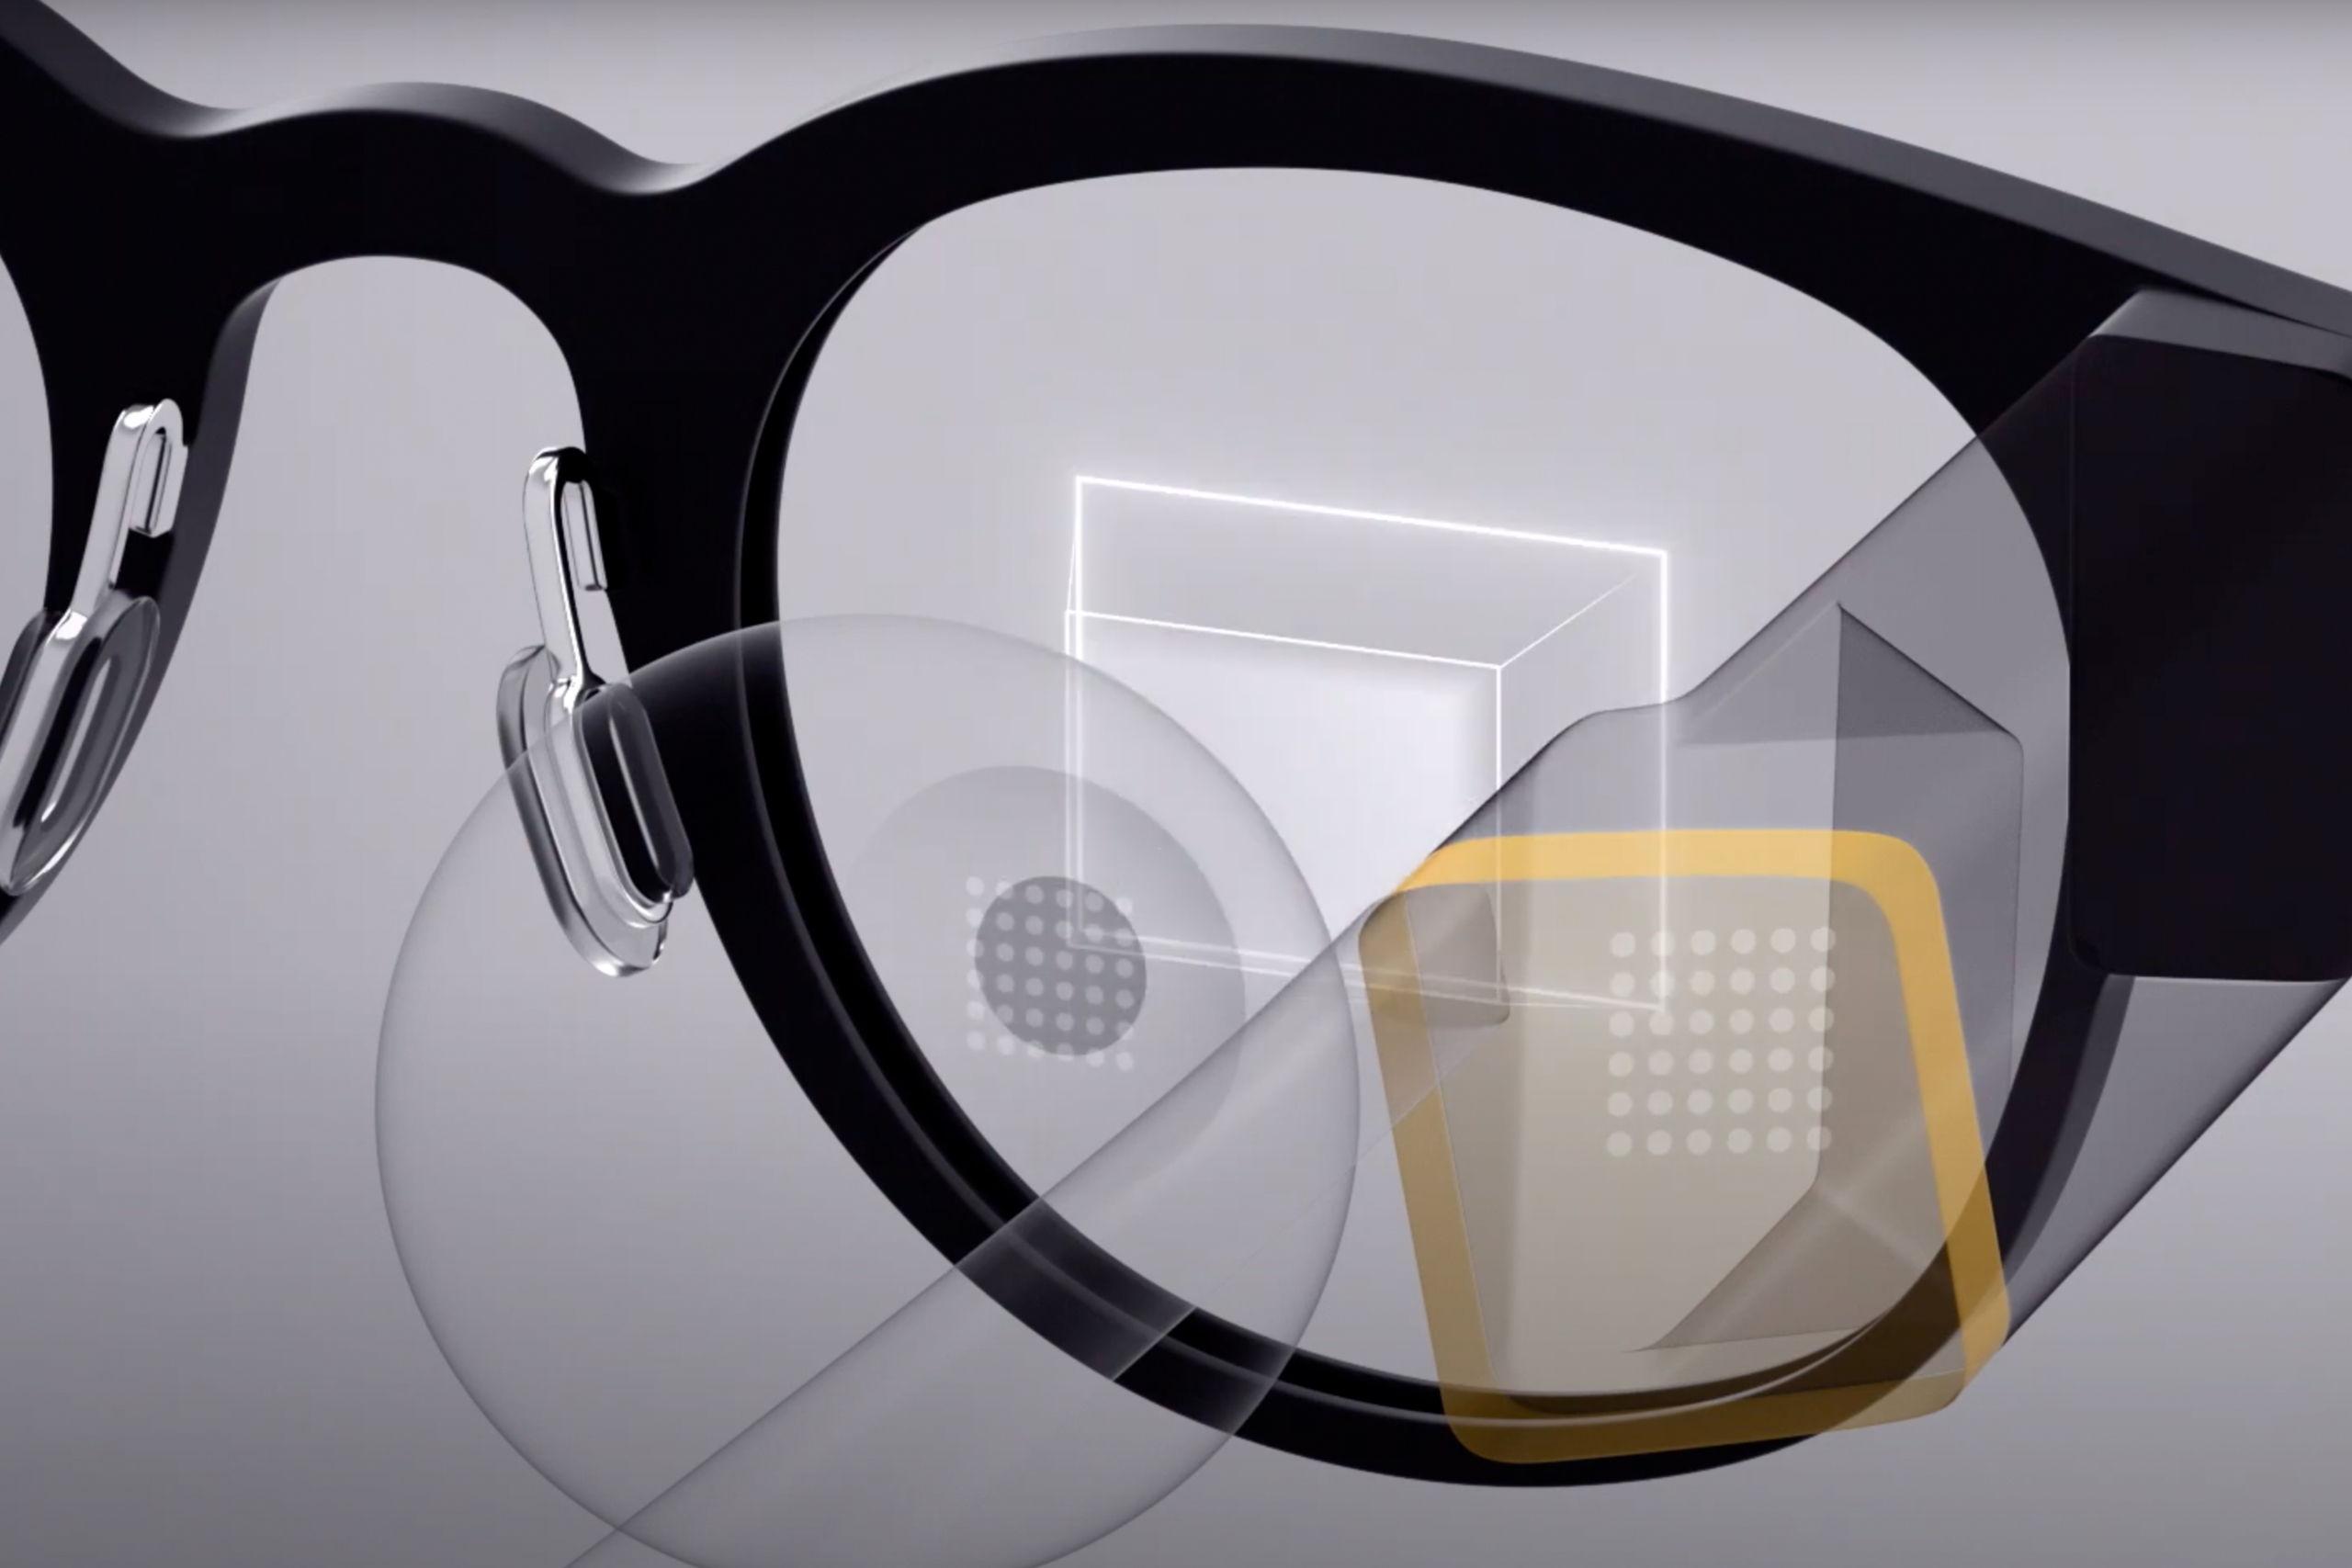 Advanced lasers shed new light on the future of AR smart glasses